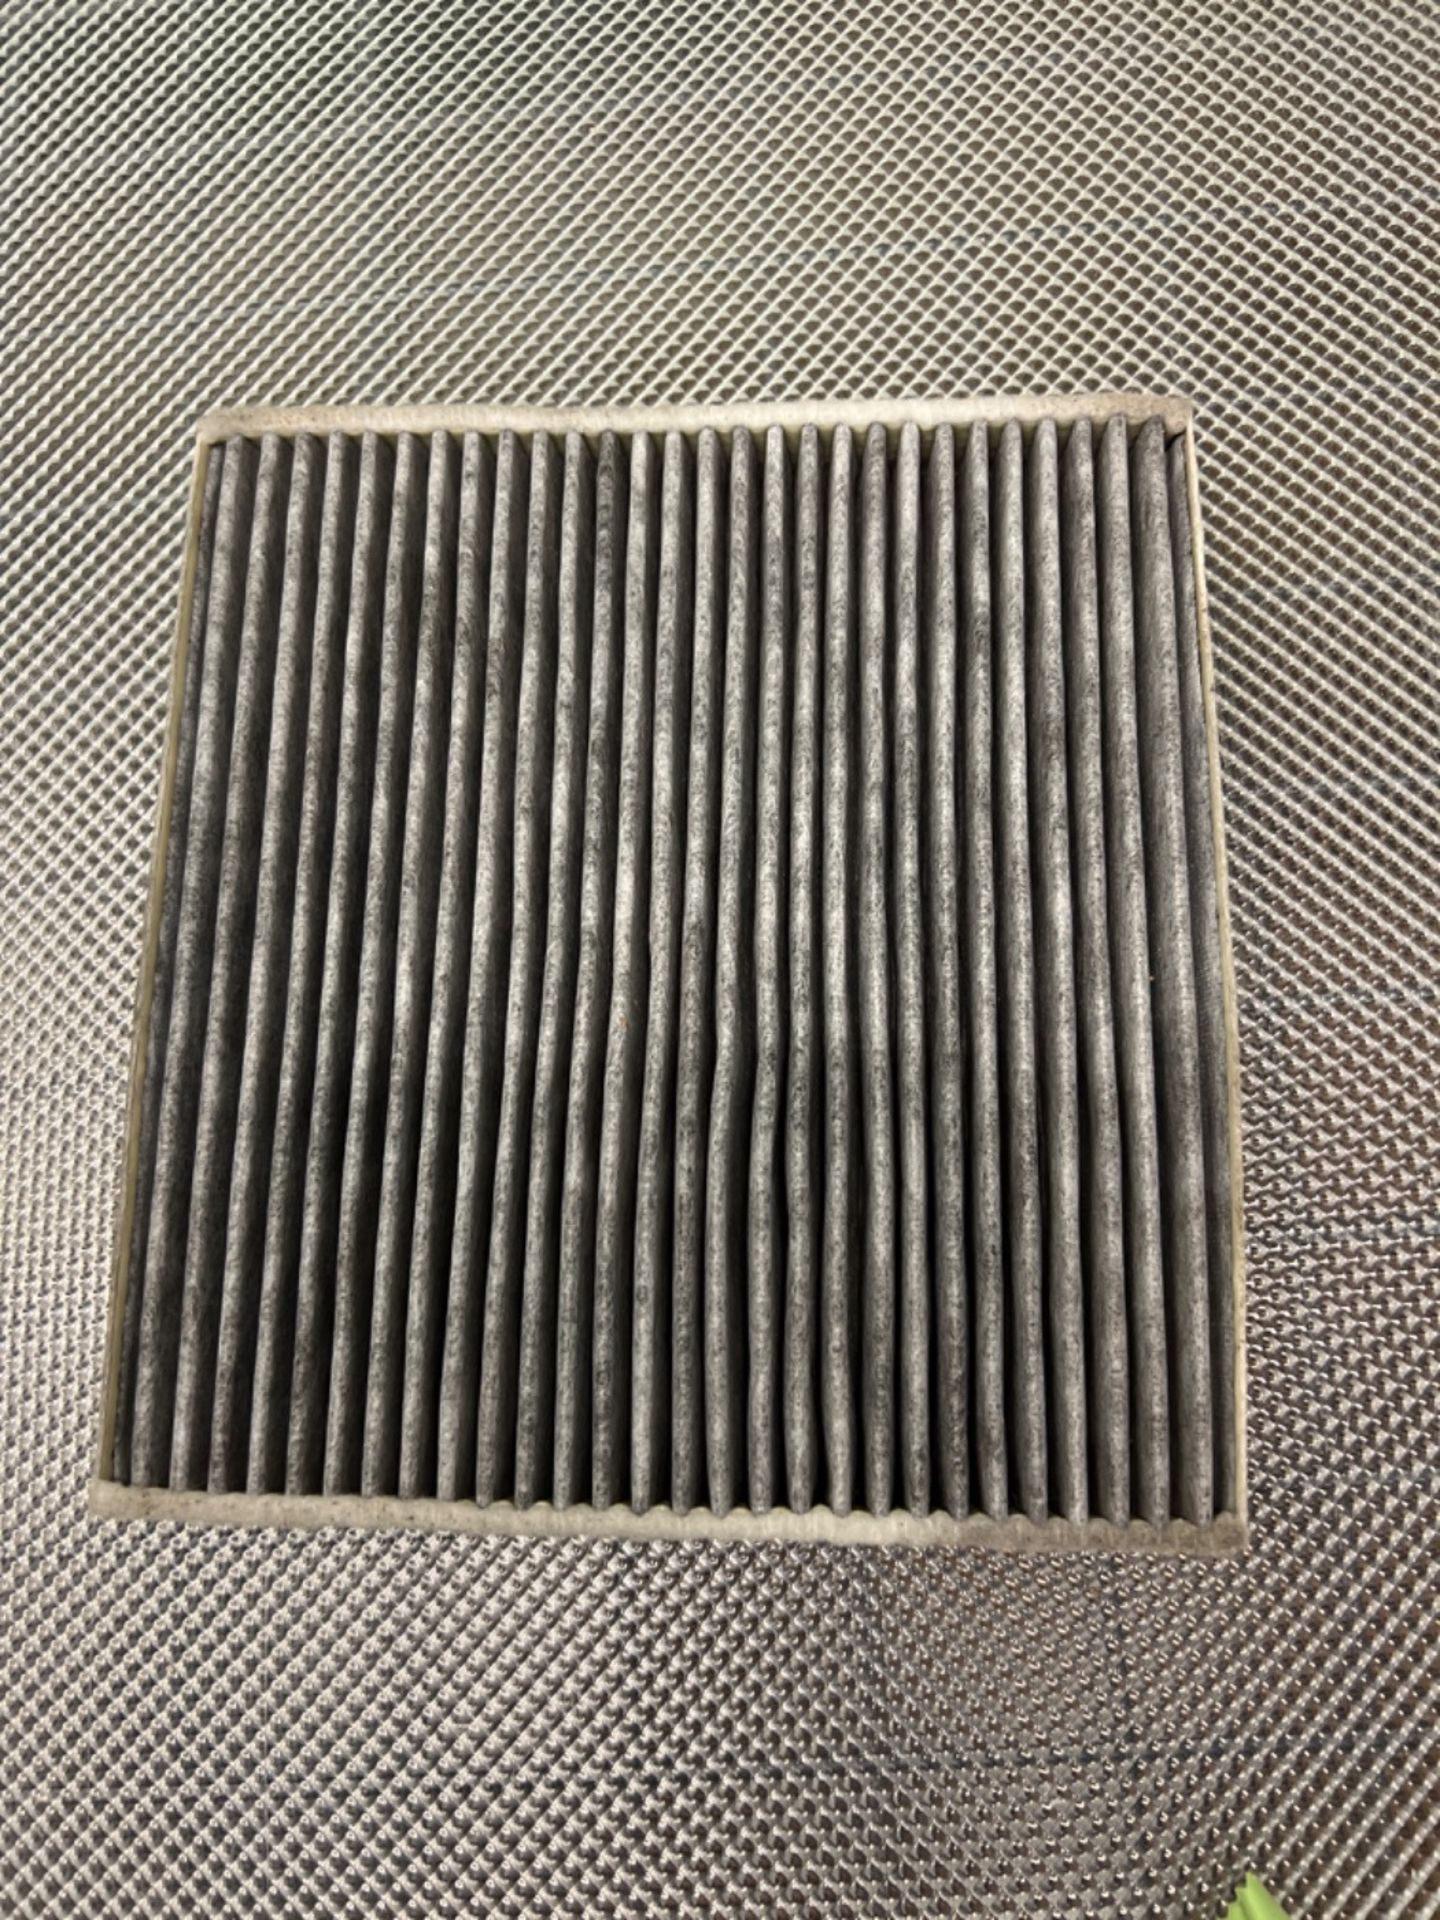 [Cracked] Original Mann-Filter Interior Filter CUK 2339 Pollen Filter With Active Charcoal... - Image 2 of 2